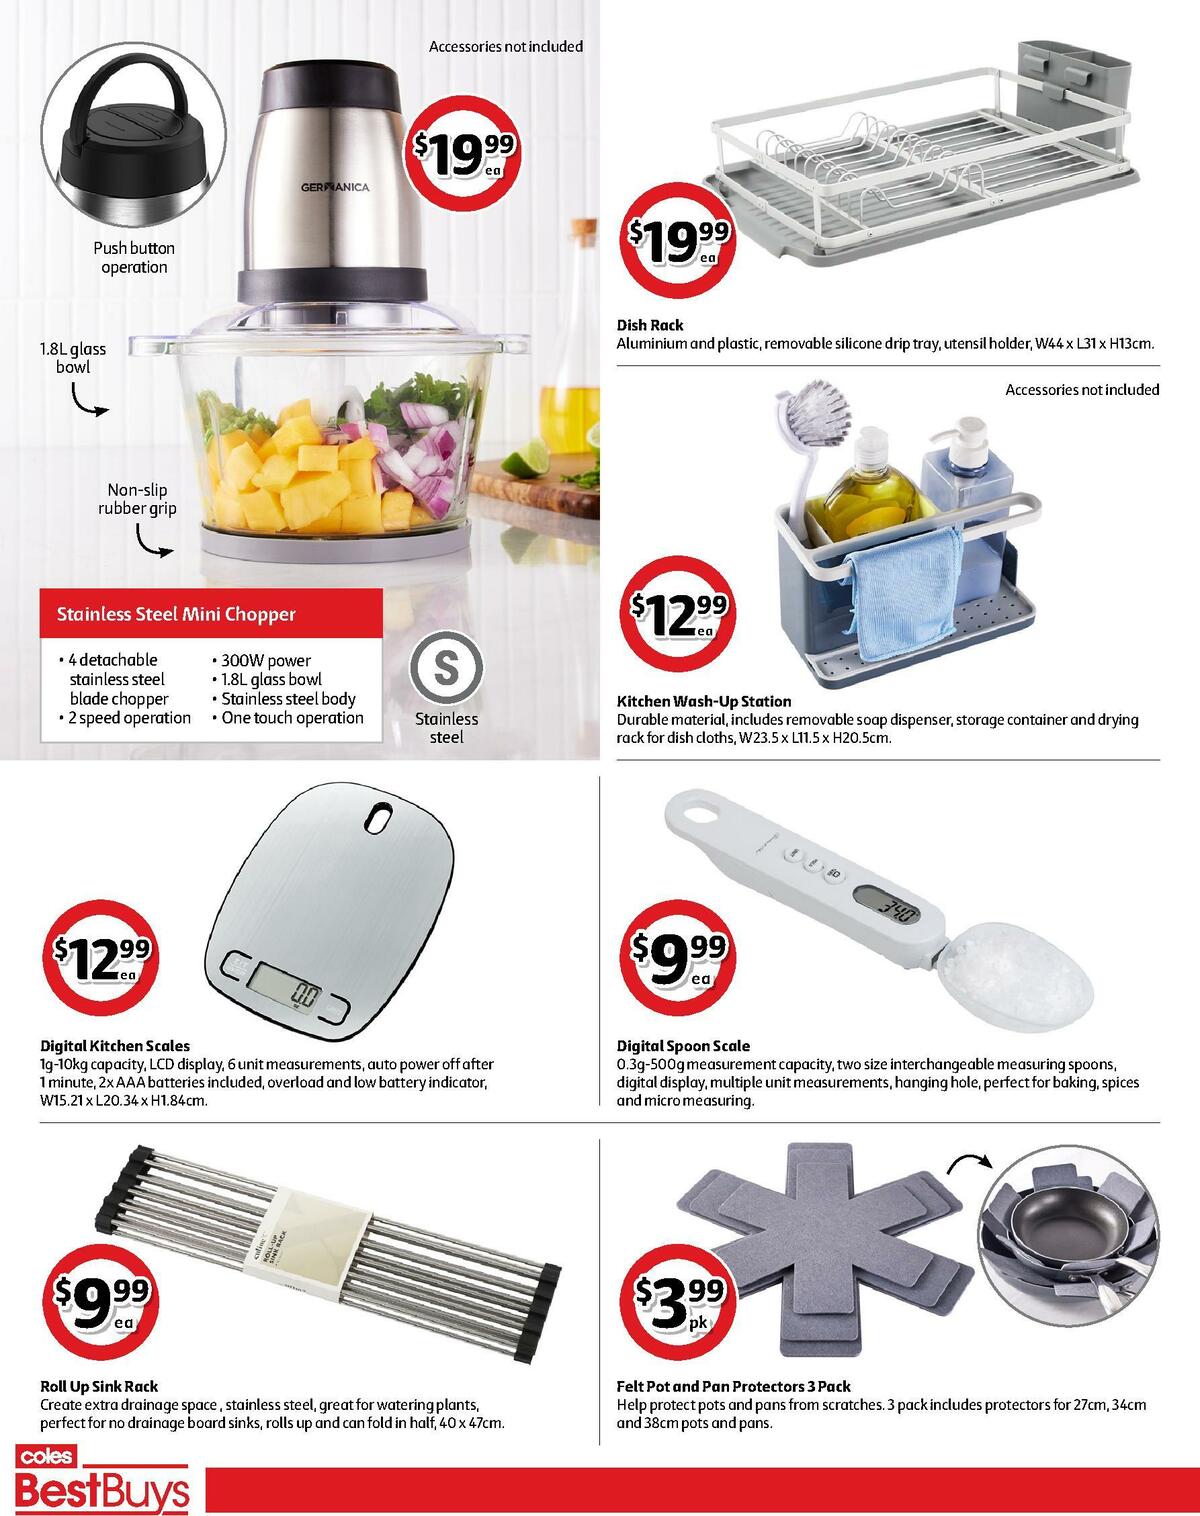 Coles Best Buys - Tidy Kitchen Catalogues from 18 February